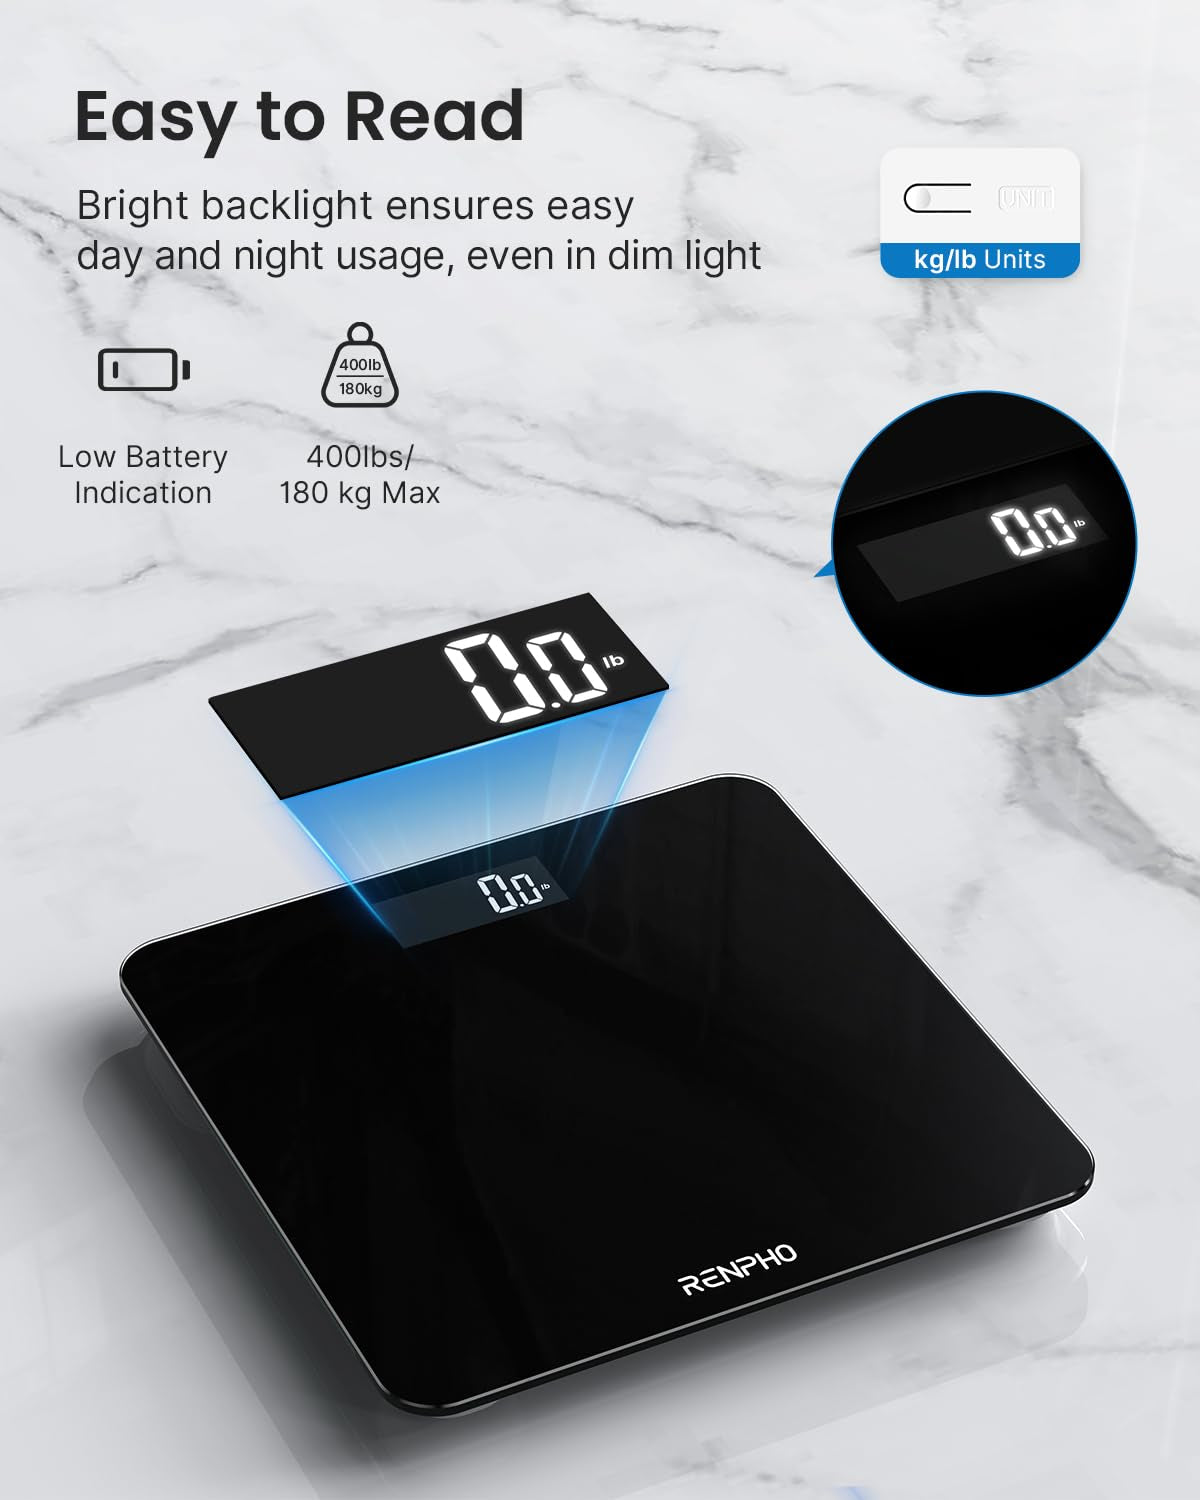 Digital Bathroom Scale, Highly Accurate Body Weight Scale with Lighted LED Display, round Corner Design, 400 Lb, Black-Core 1S